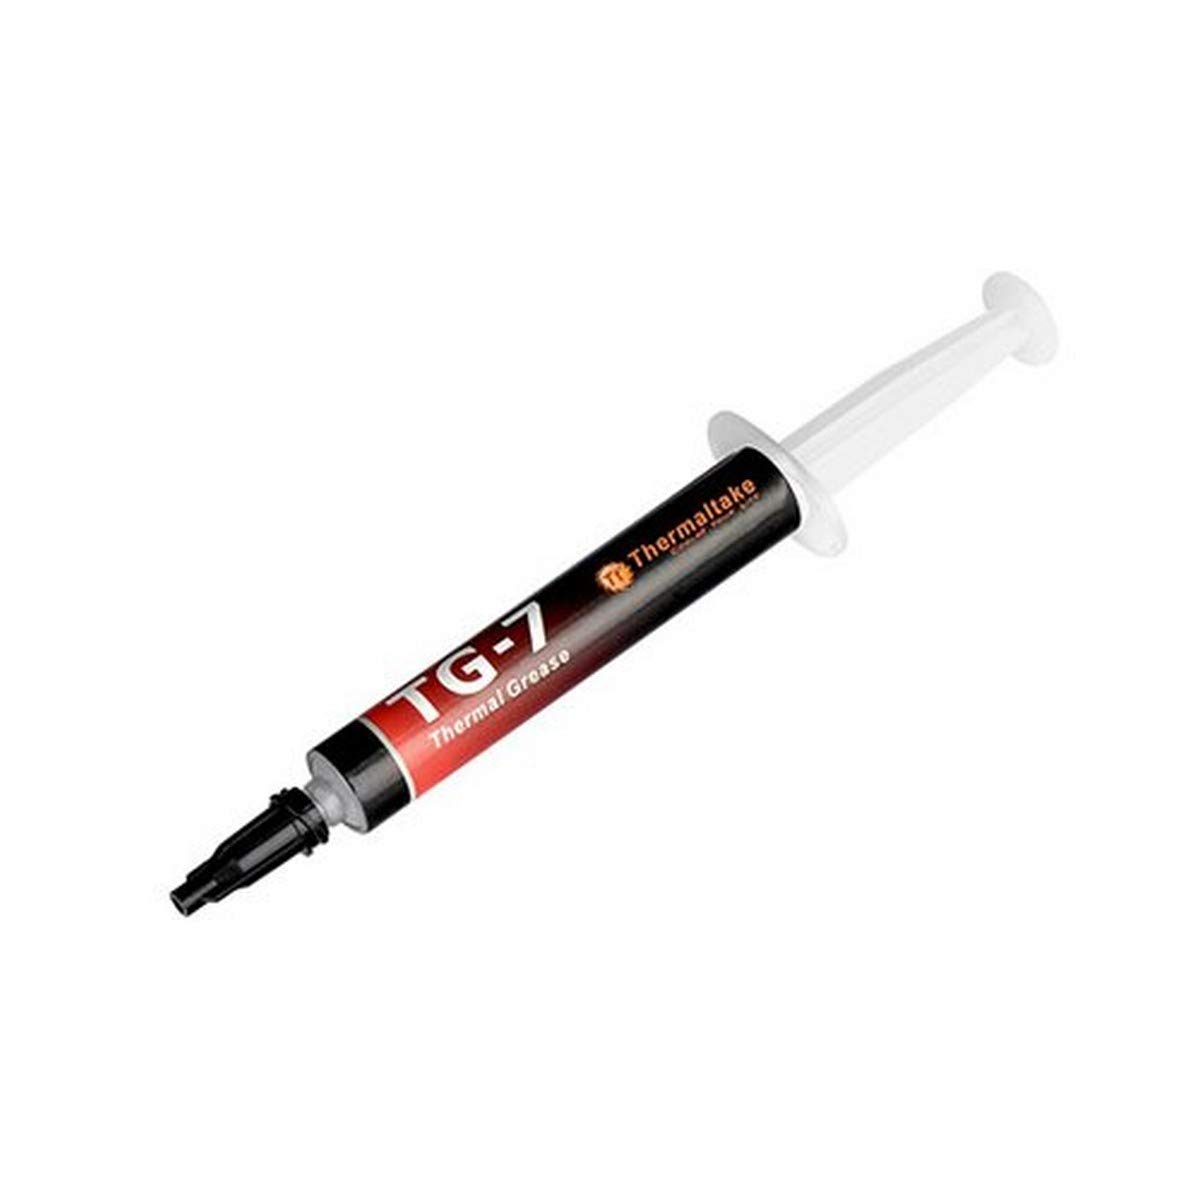 Thermaltake TG-7 Thermal Grease, 4g, Extreme Performance for CPU or GPU CL-O004-GROSGM-A, Gray $3.99